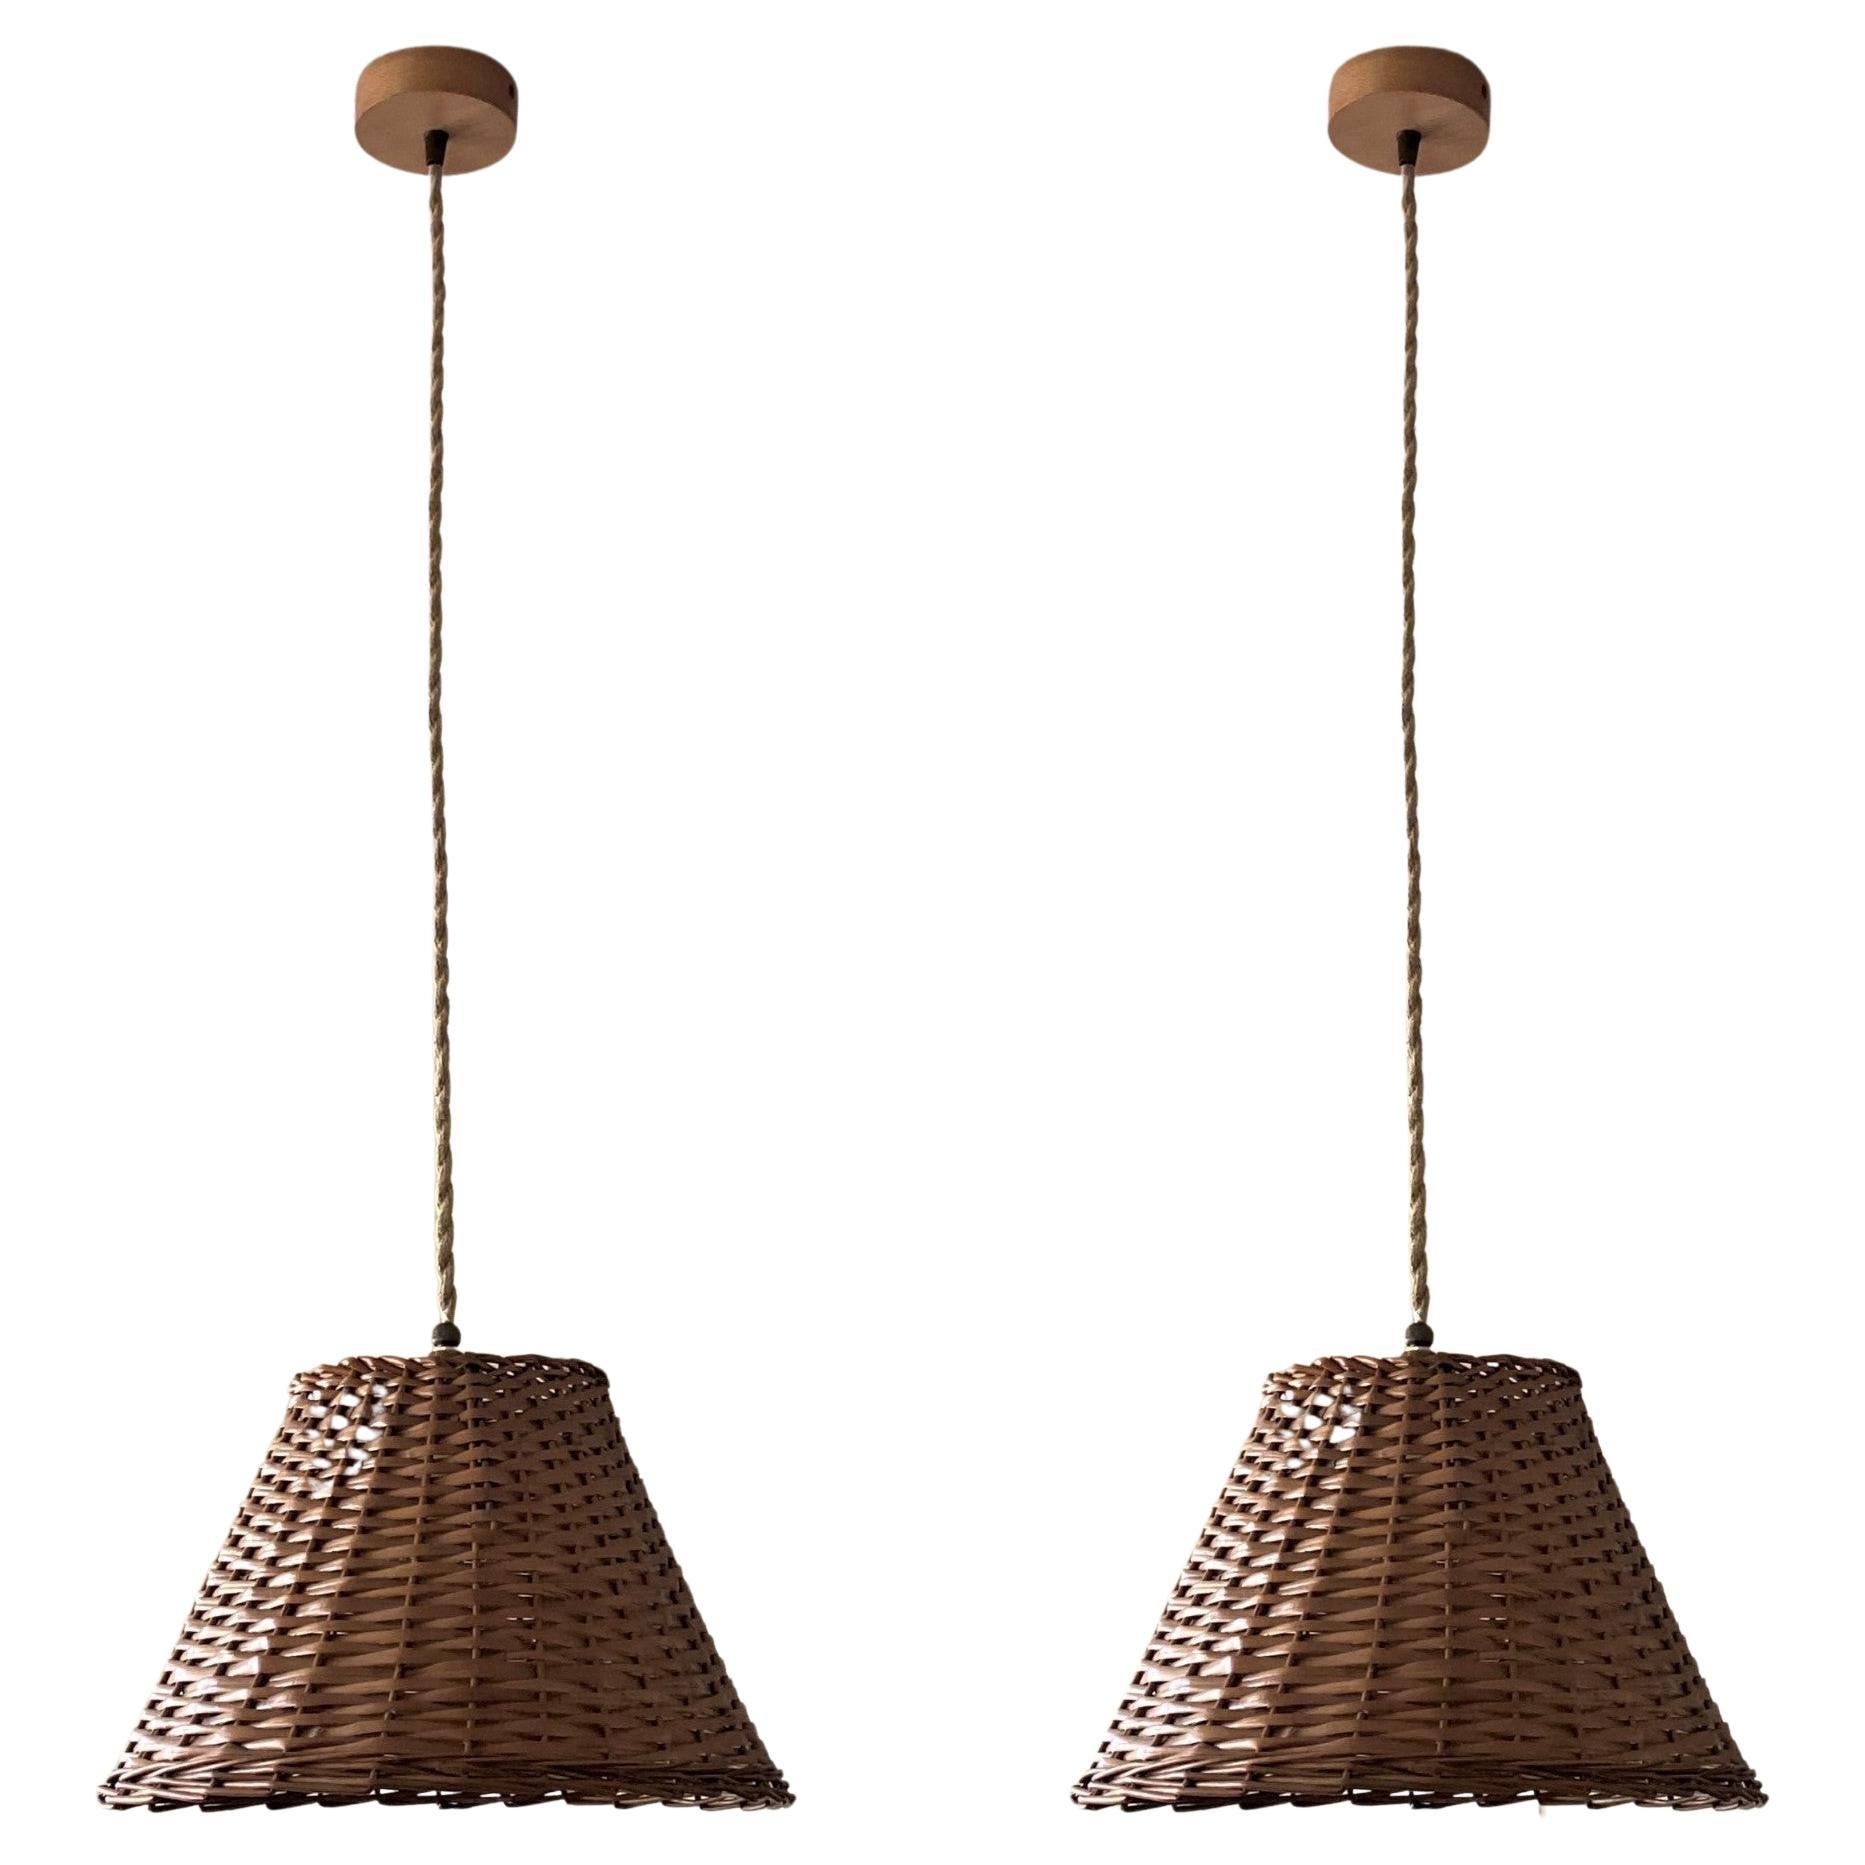 Set of three midcentury rattan pendants, Denmark, 1960s. These beautiful suspension lamps are handcrafted in rattan, lamp shade design with wood canopy. Each pendant with single brass bulb holder for a large sized E27 crew bulb, provinding a warm